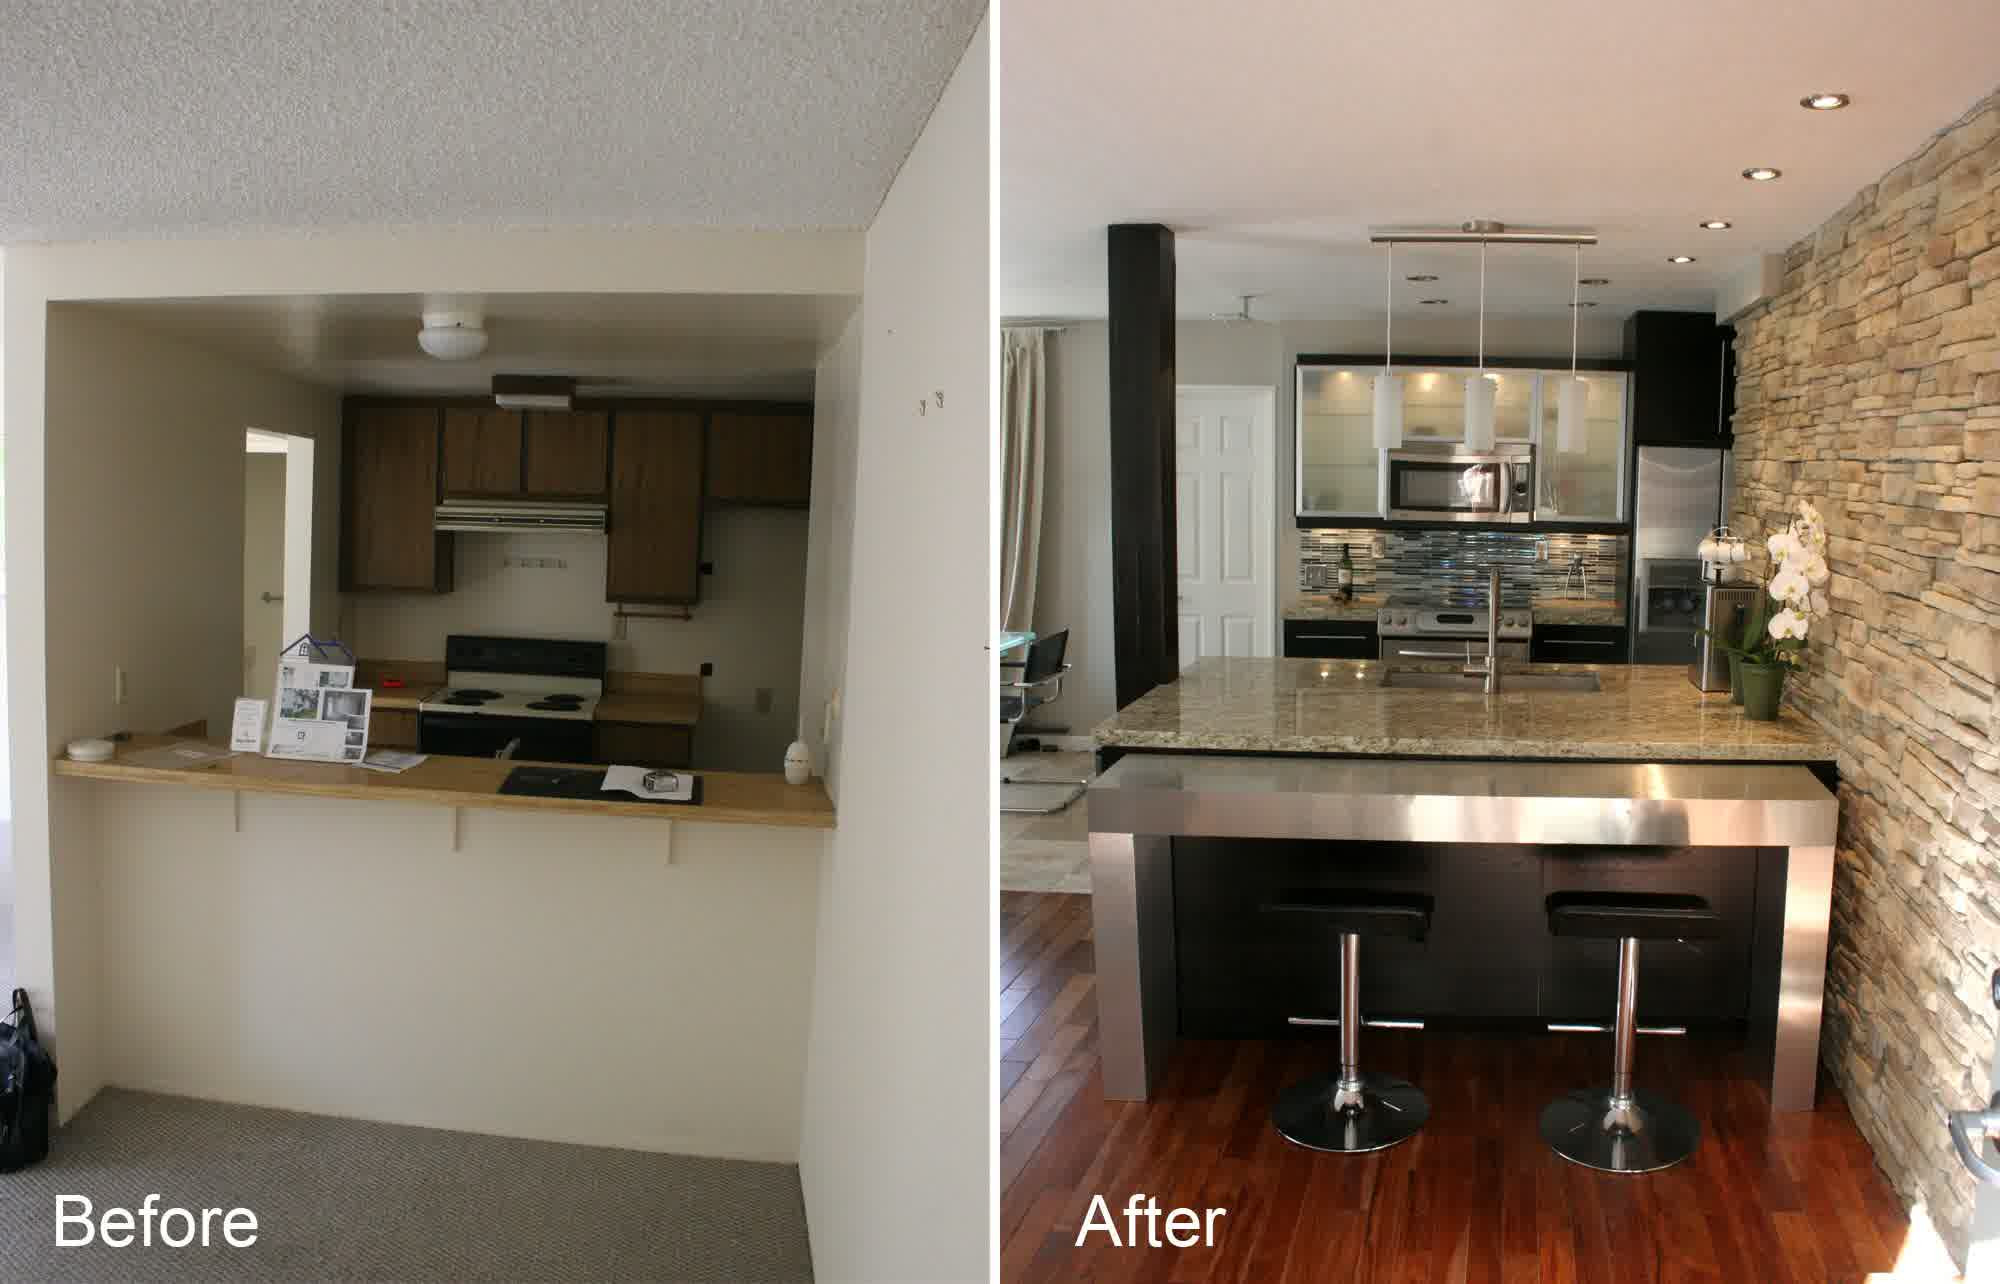 Remodeling Kitchen Before And After
 Small Kitchen Remodel Before and After for Stunning and